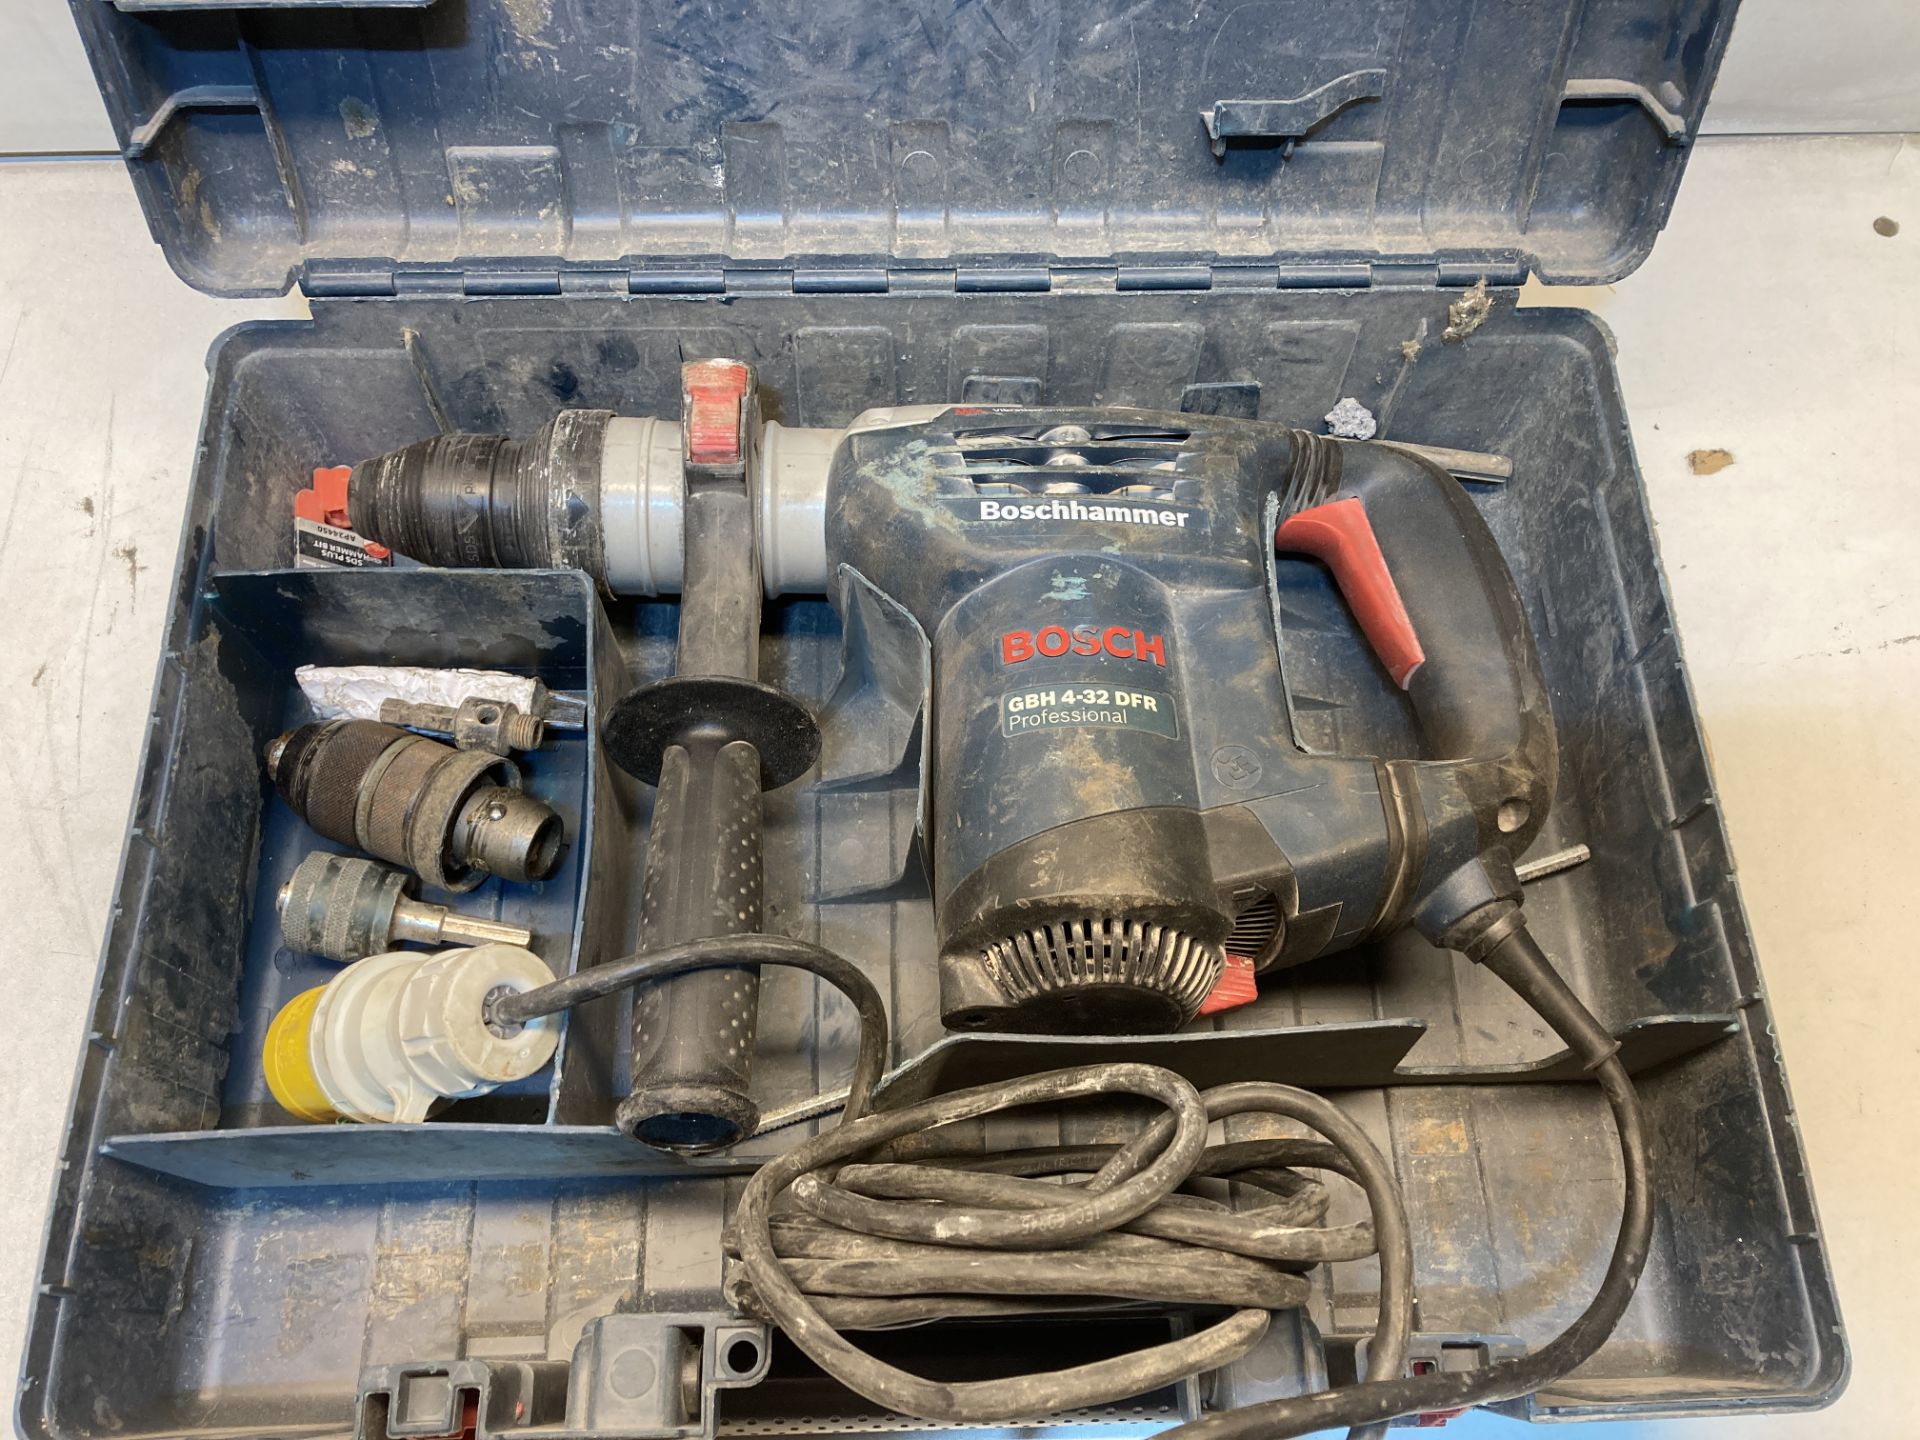 Bosch GBH 4-32 DFR Professional Rotary Hammer Drill W/ Case & Accessories| 110v - Image 2 of 4